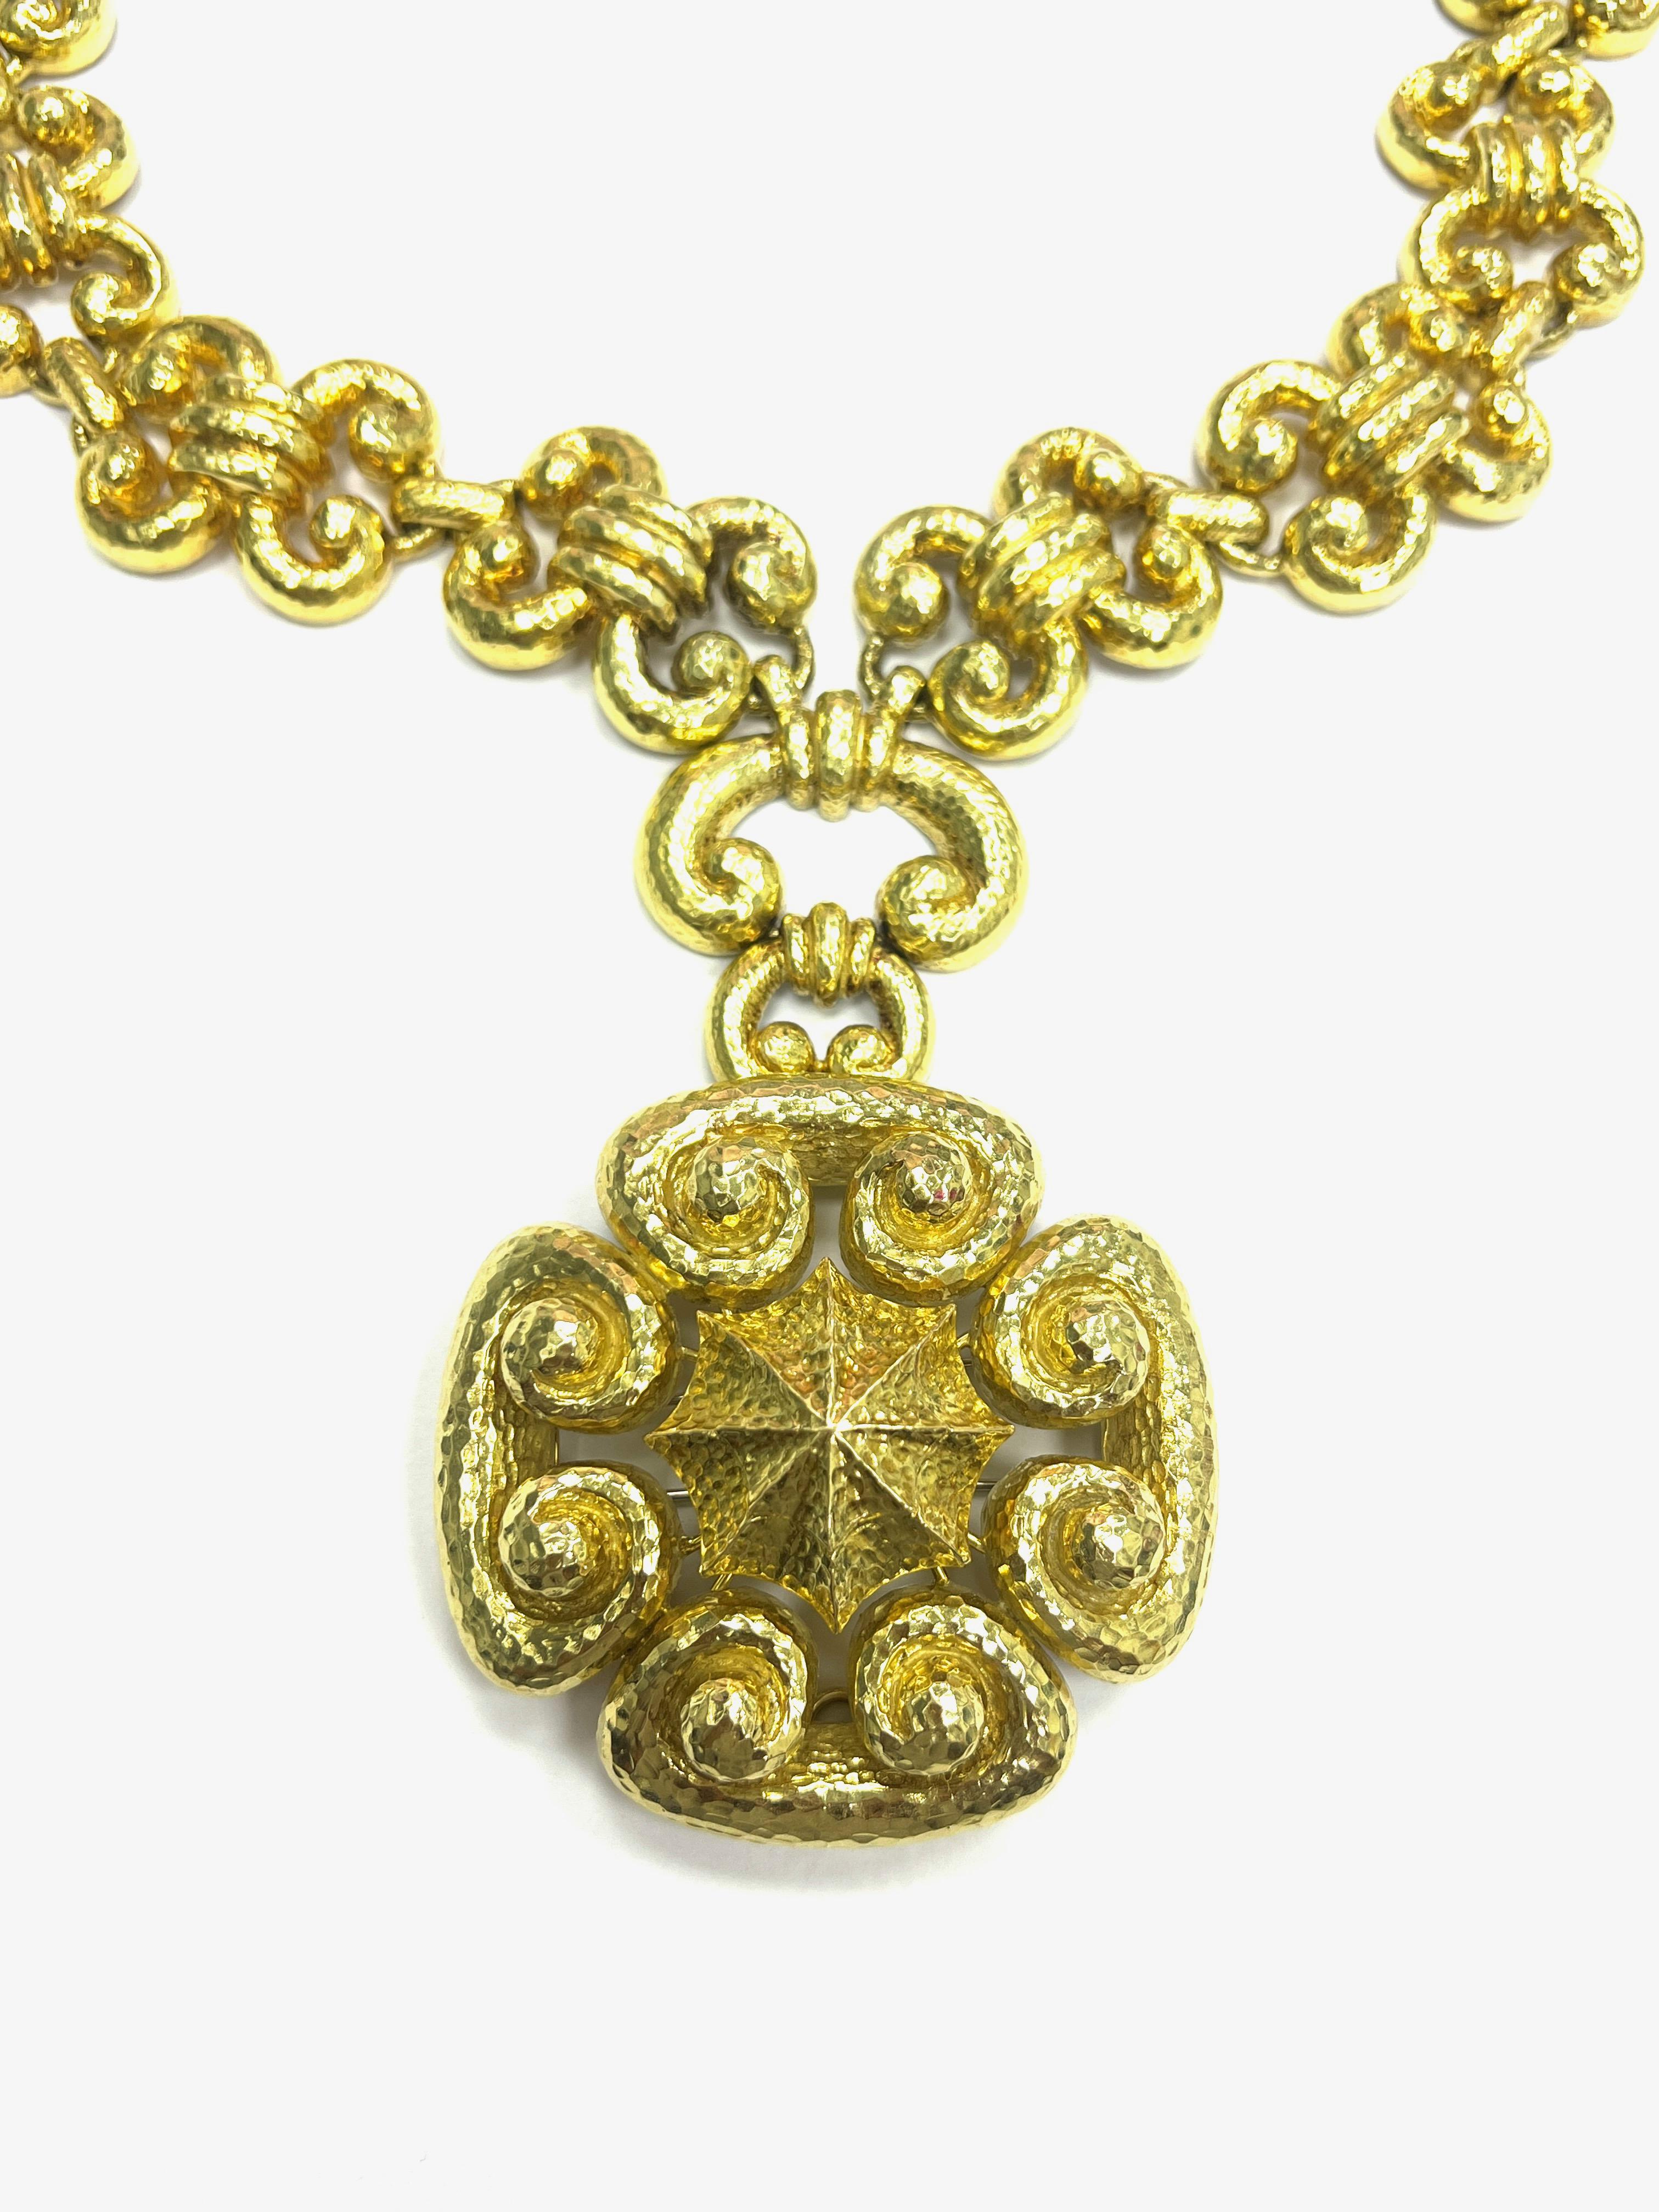 David Webb One of A Kind Hammered 18k Yellow Gold Pendant Necklace

A massive and heavy 18 karat yellow gold hammered necklace with a detachable pendant that can be converted into a brooch; marked David Webb, Webb 18k

Size: Necklace width 1.19